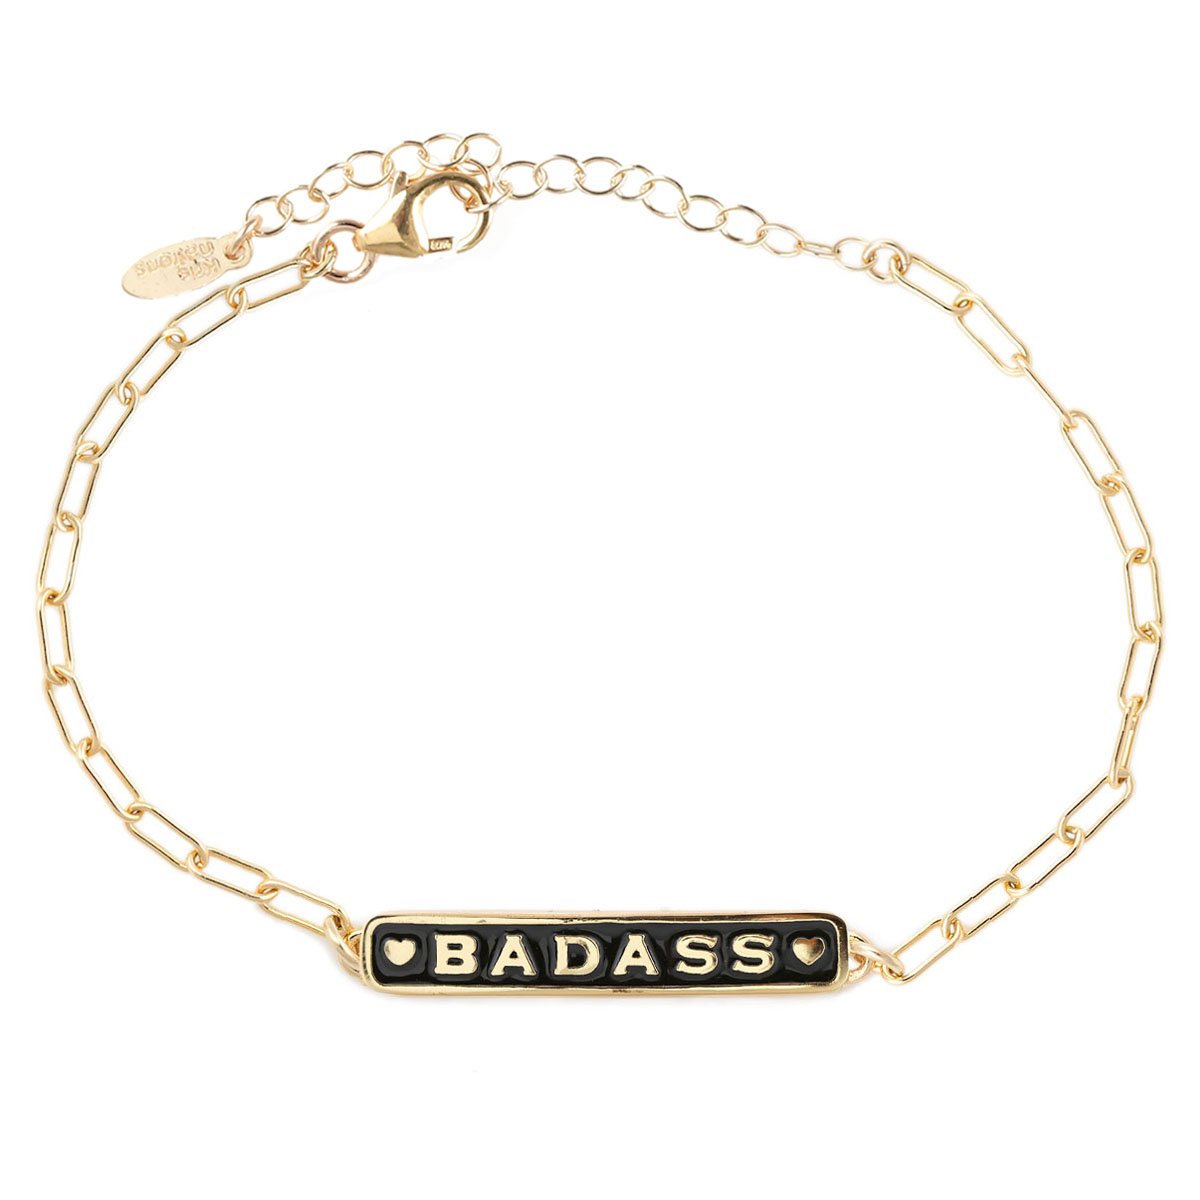 Badass Enamel Bracelet with Drawn Cable Chain